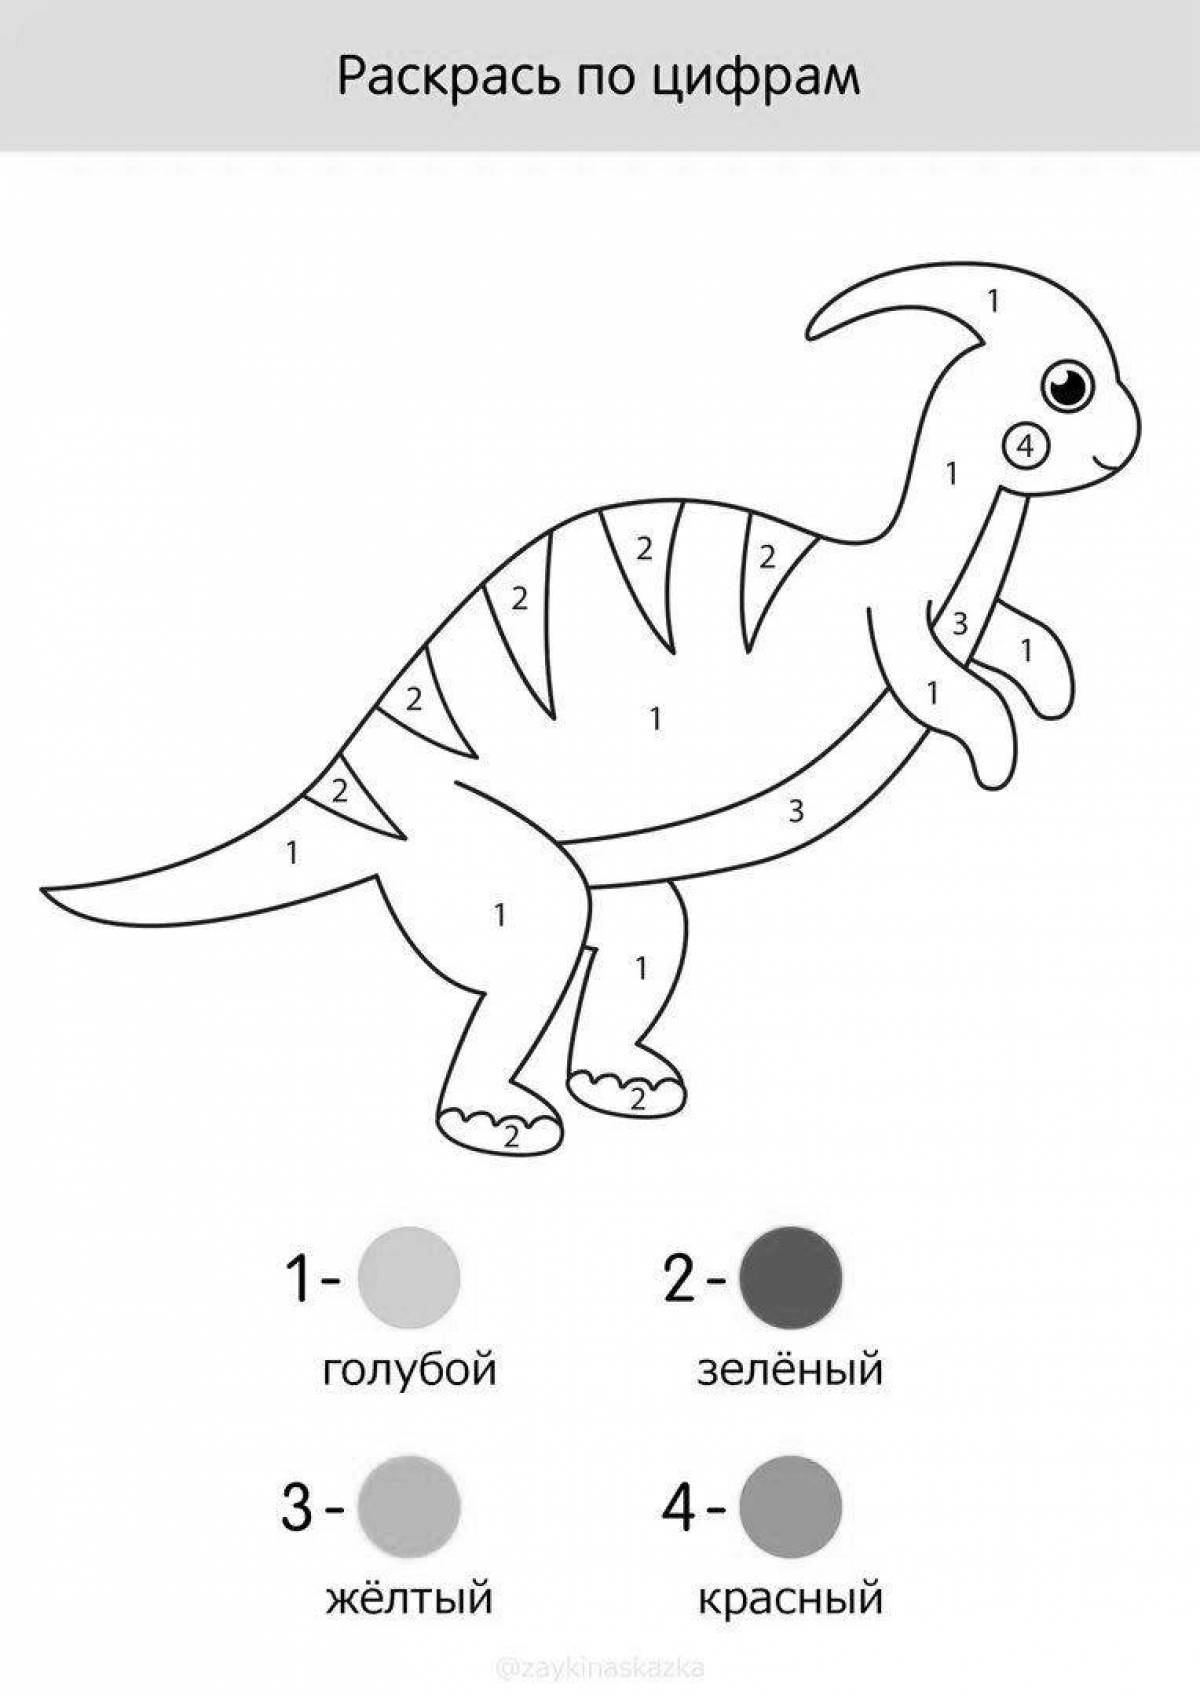 Fun coloring dinosaurs by numbers